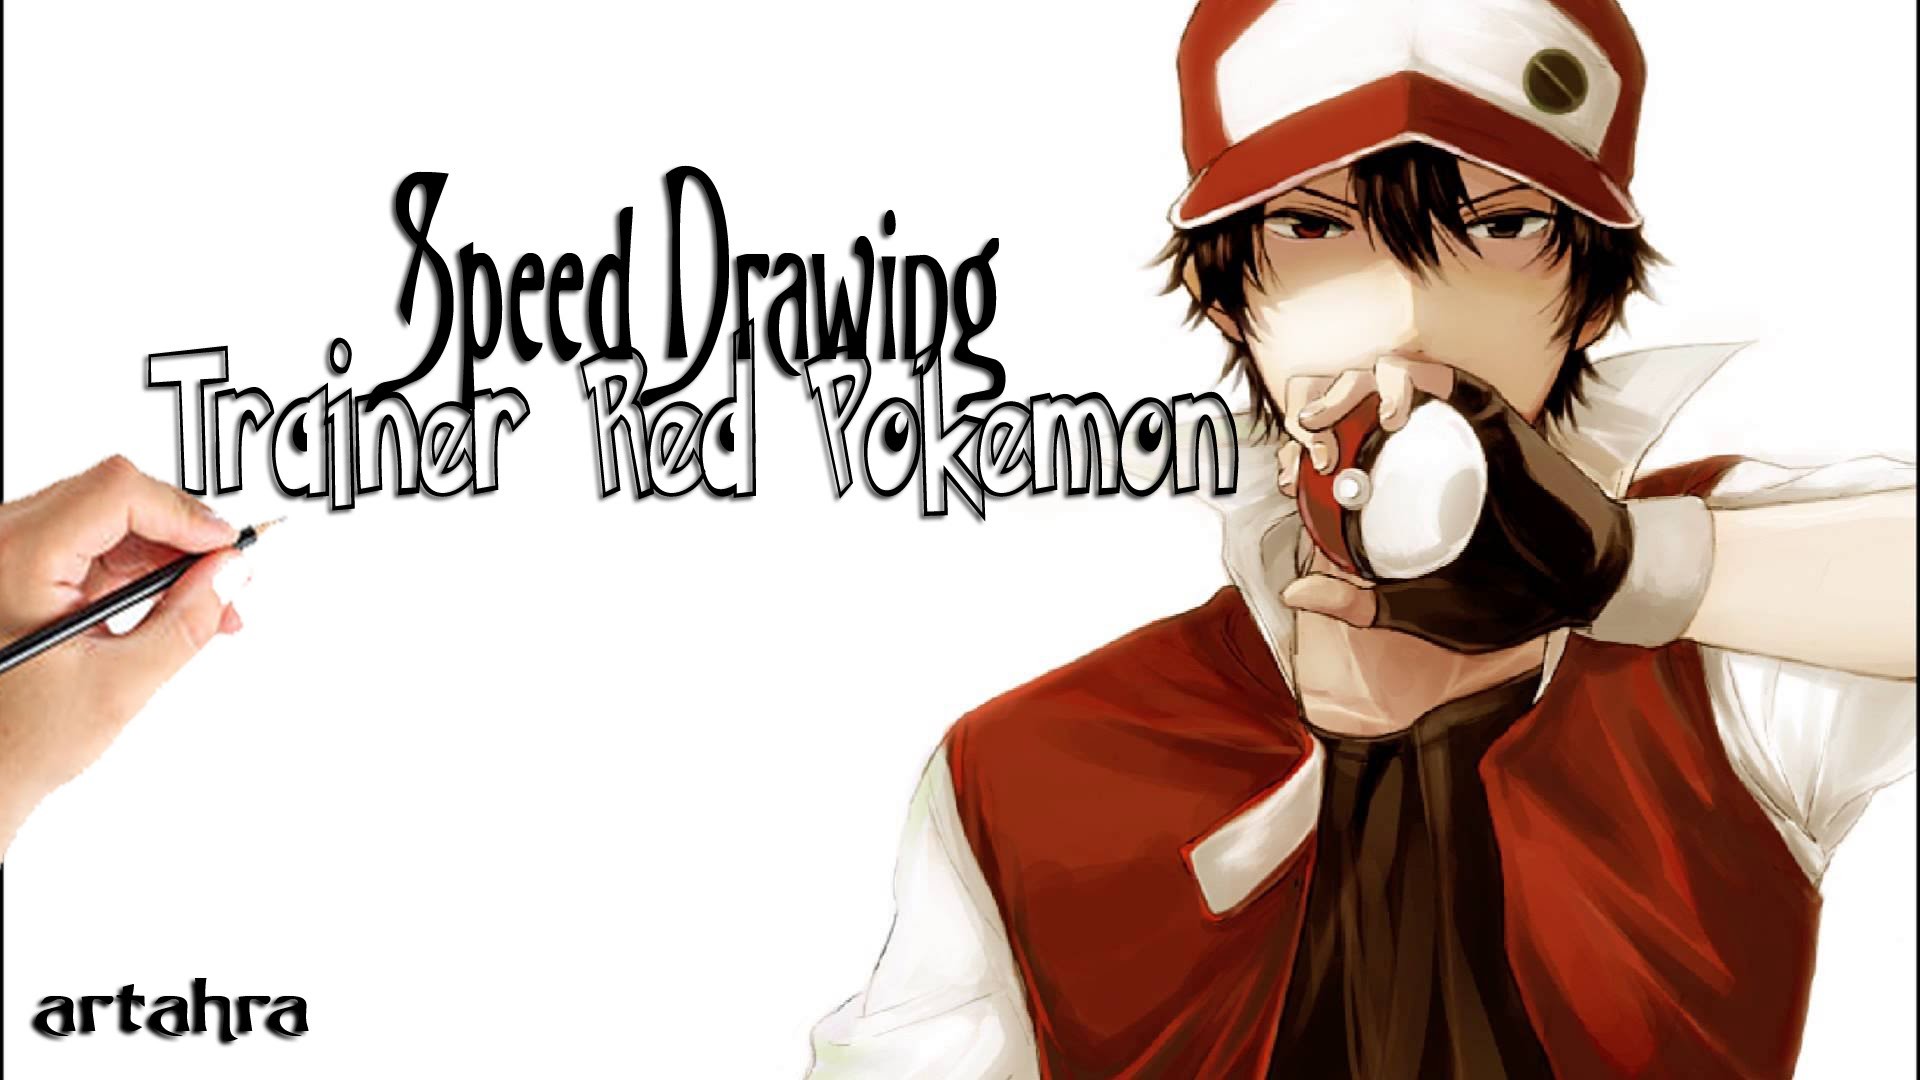 1920x1080 Speed Drawing Trainer Red Pokemon [Team Red ãã±ã¢ã³ ]